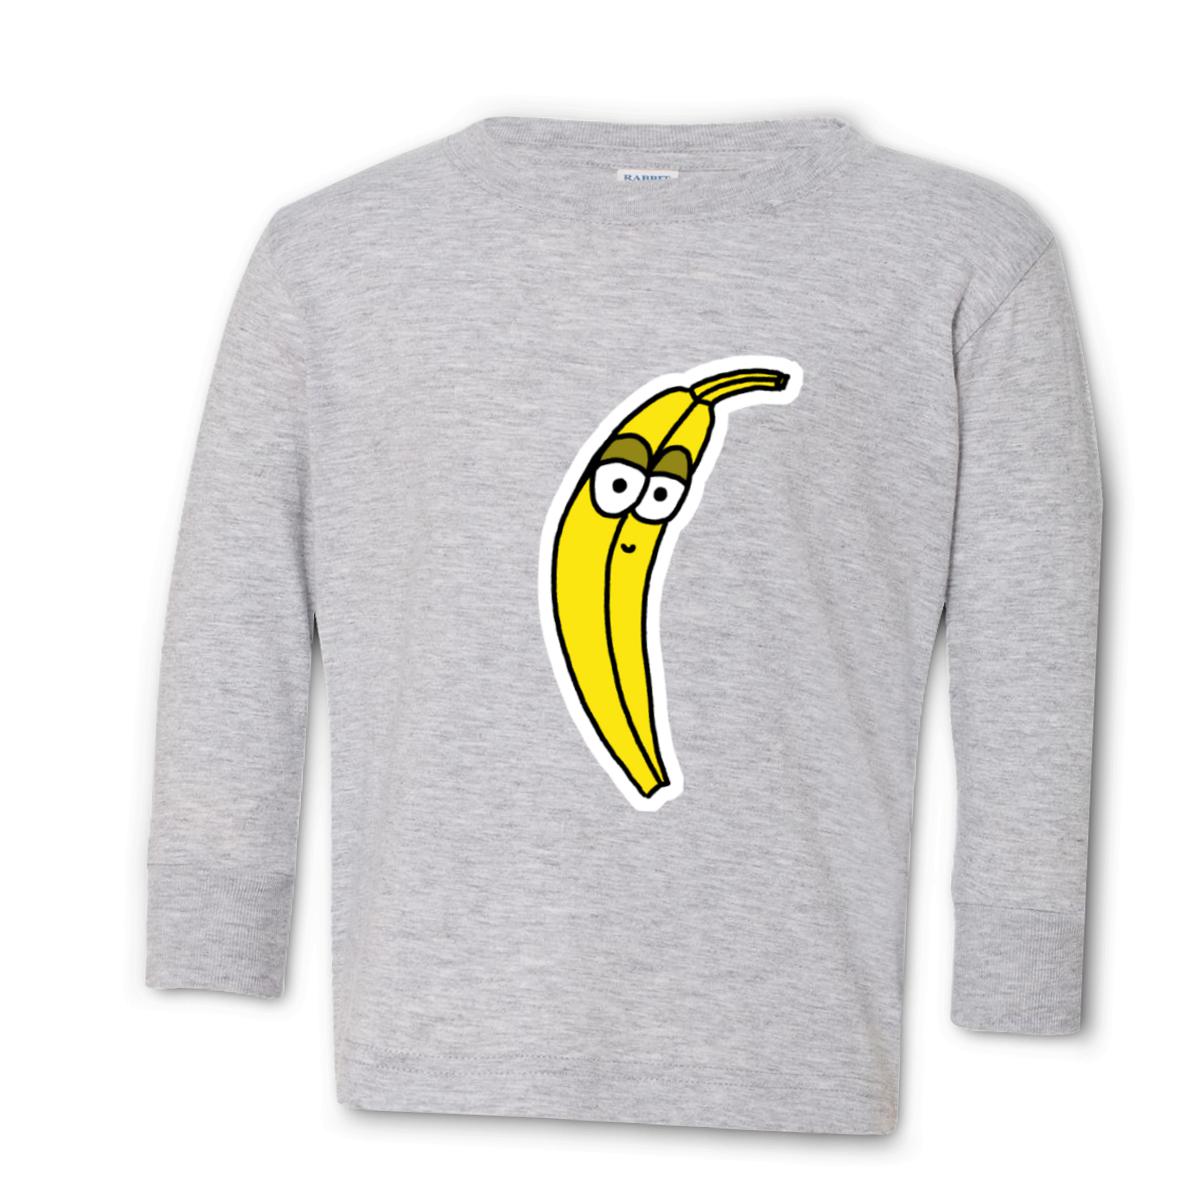 Plantain Toddler Long Sleeve Tee 56T heather